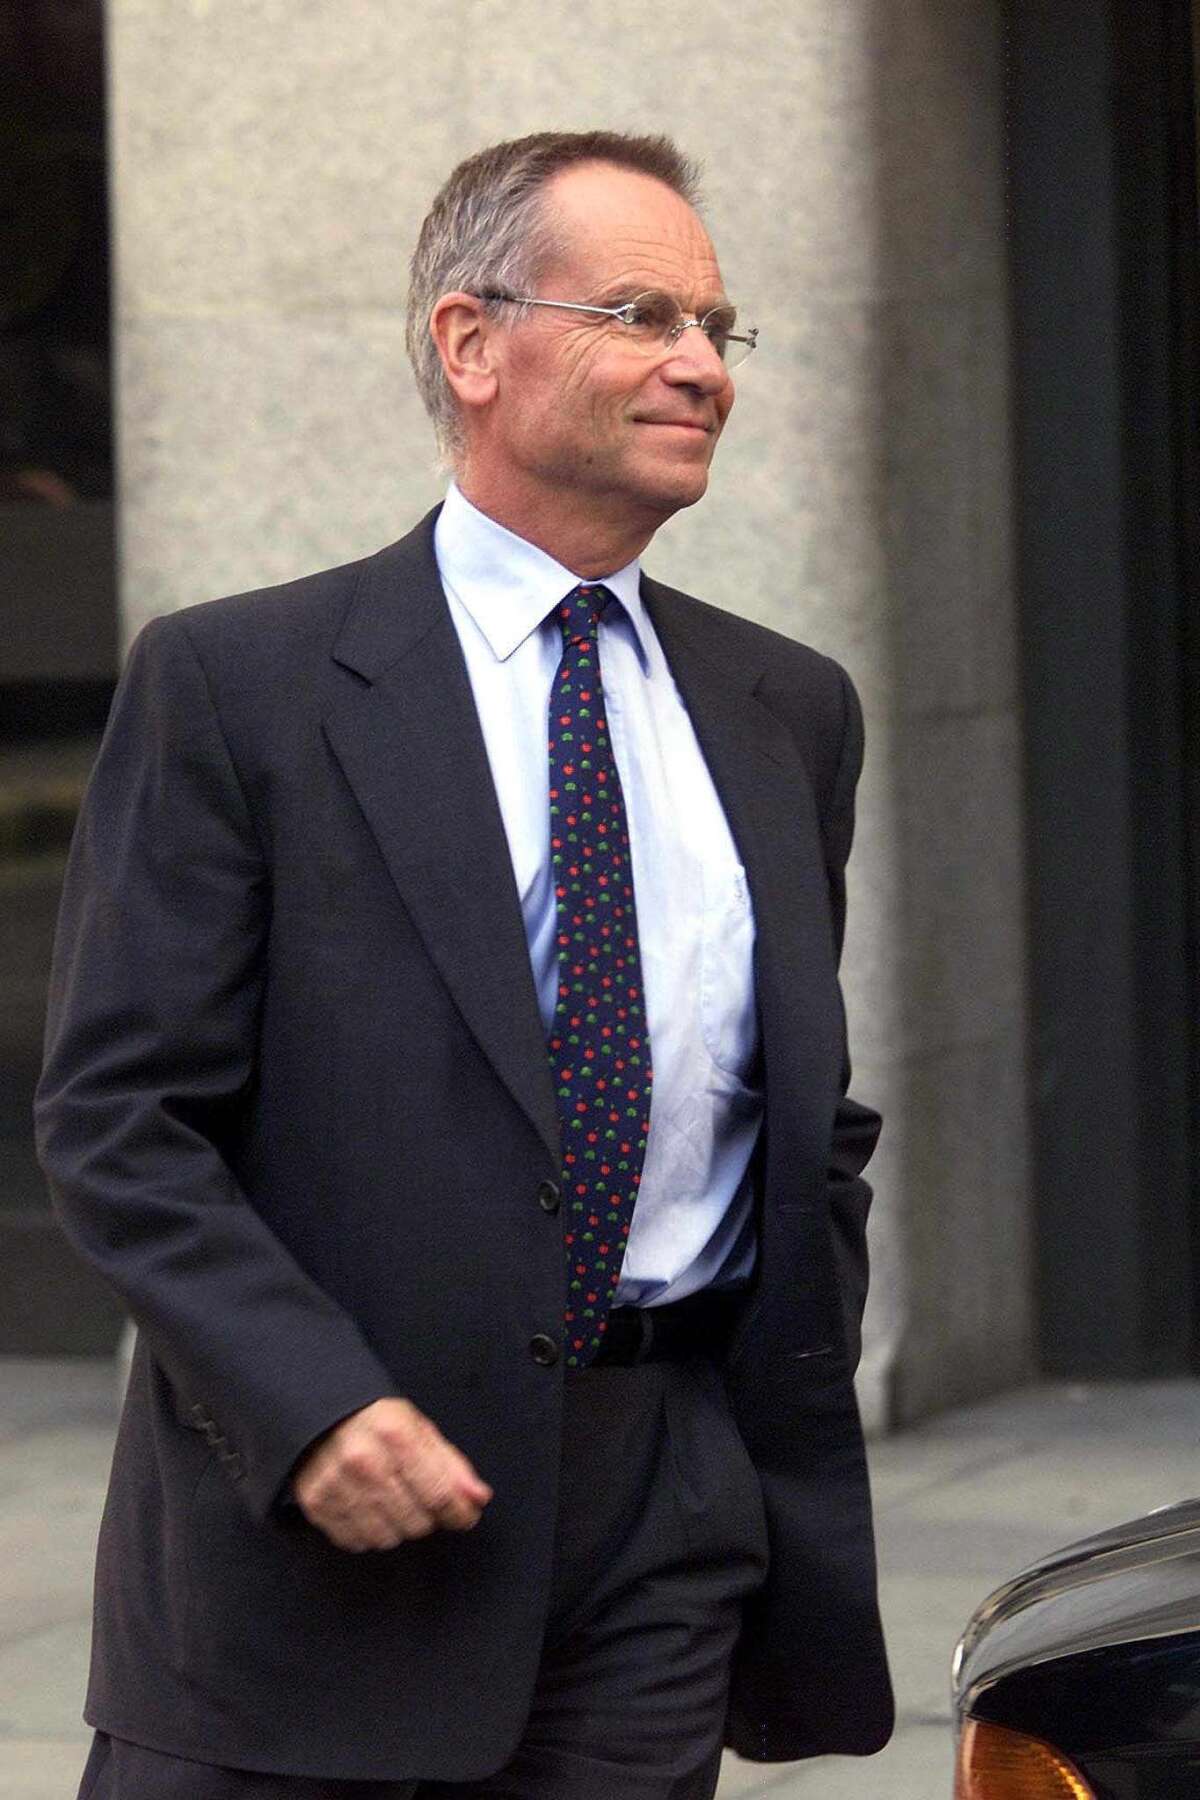 Writer Jeffrey Archer in 2001. On Sunday, his story about his journey with prostate cancer was published in the Mail.